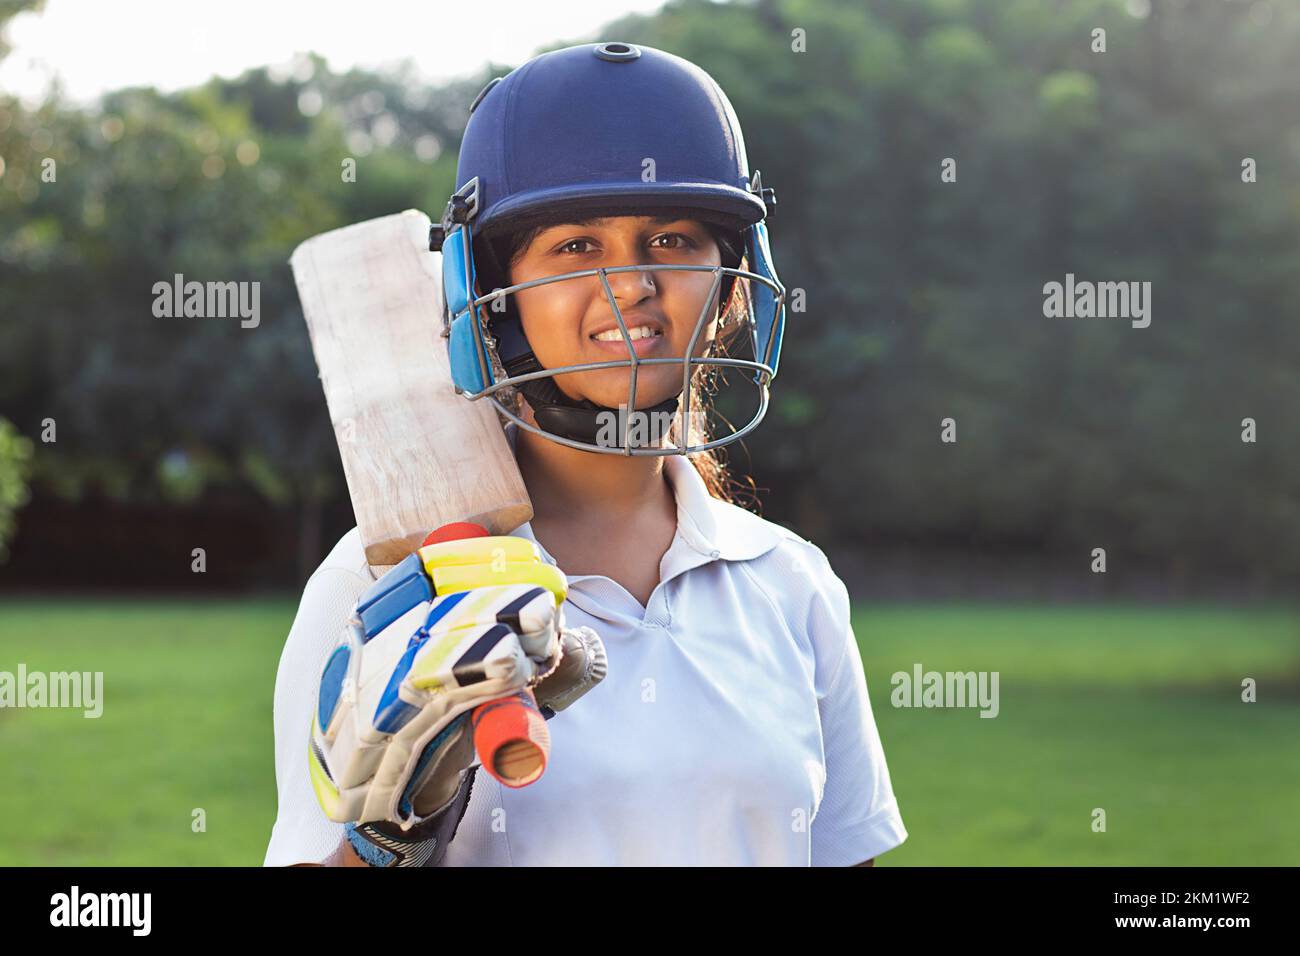 Portrait Of A Female Cricketer Holding A Cricket Bat Stock Photo